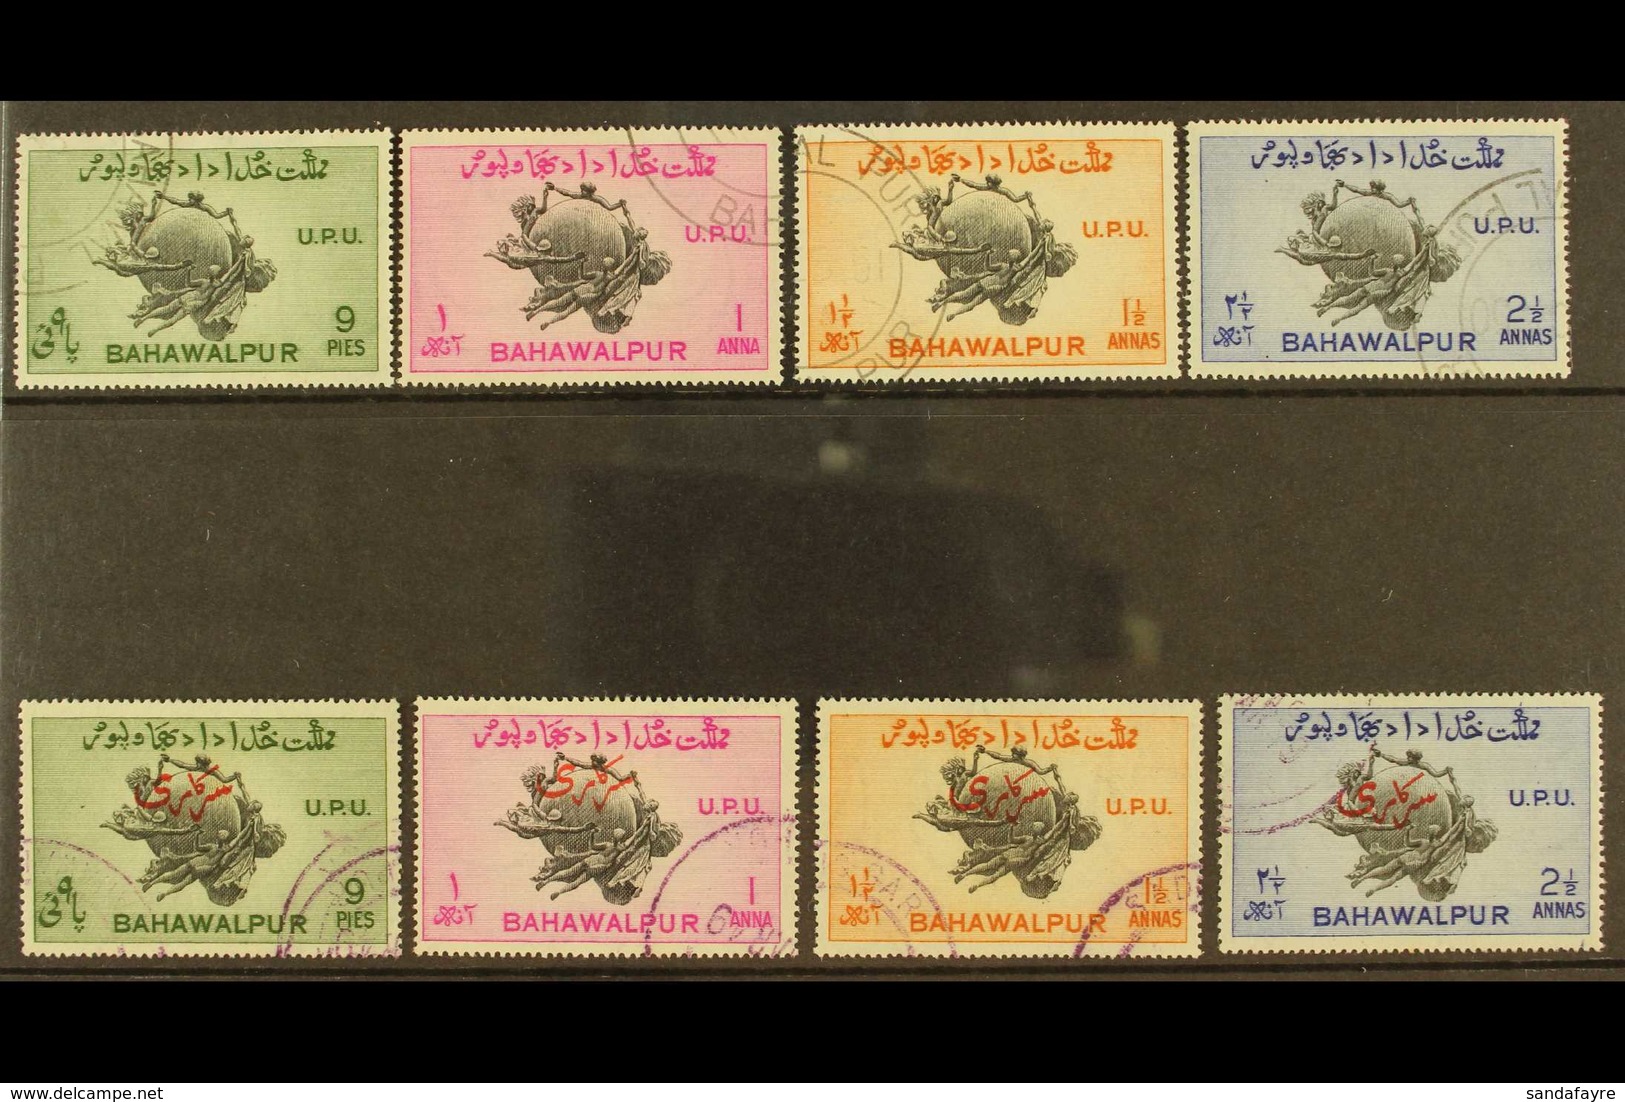 1949 UPU Perf 17½ X17 Postal & Official Sets, SG 43a/46a & SG O28b/31b, Very Fine Used (8 Stamps) For More Images, Pleas - Bahawalpur